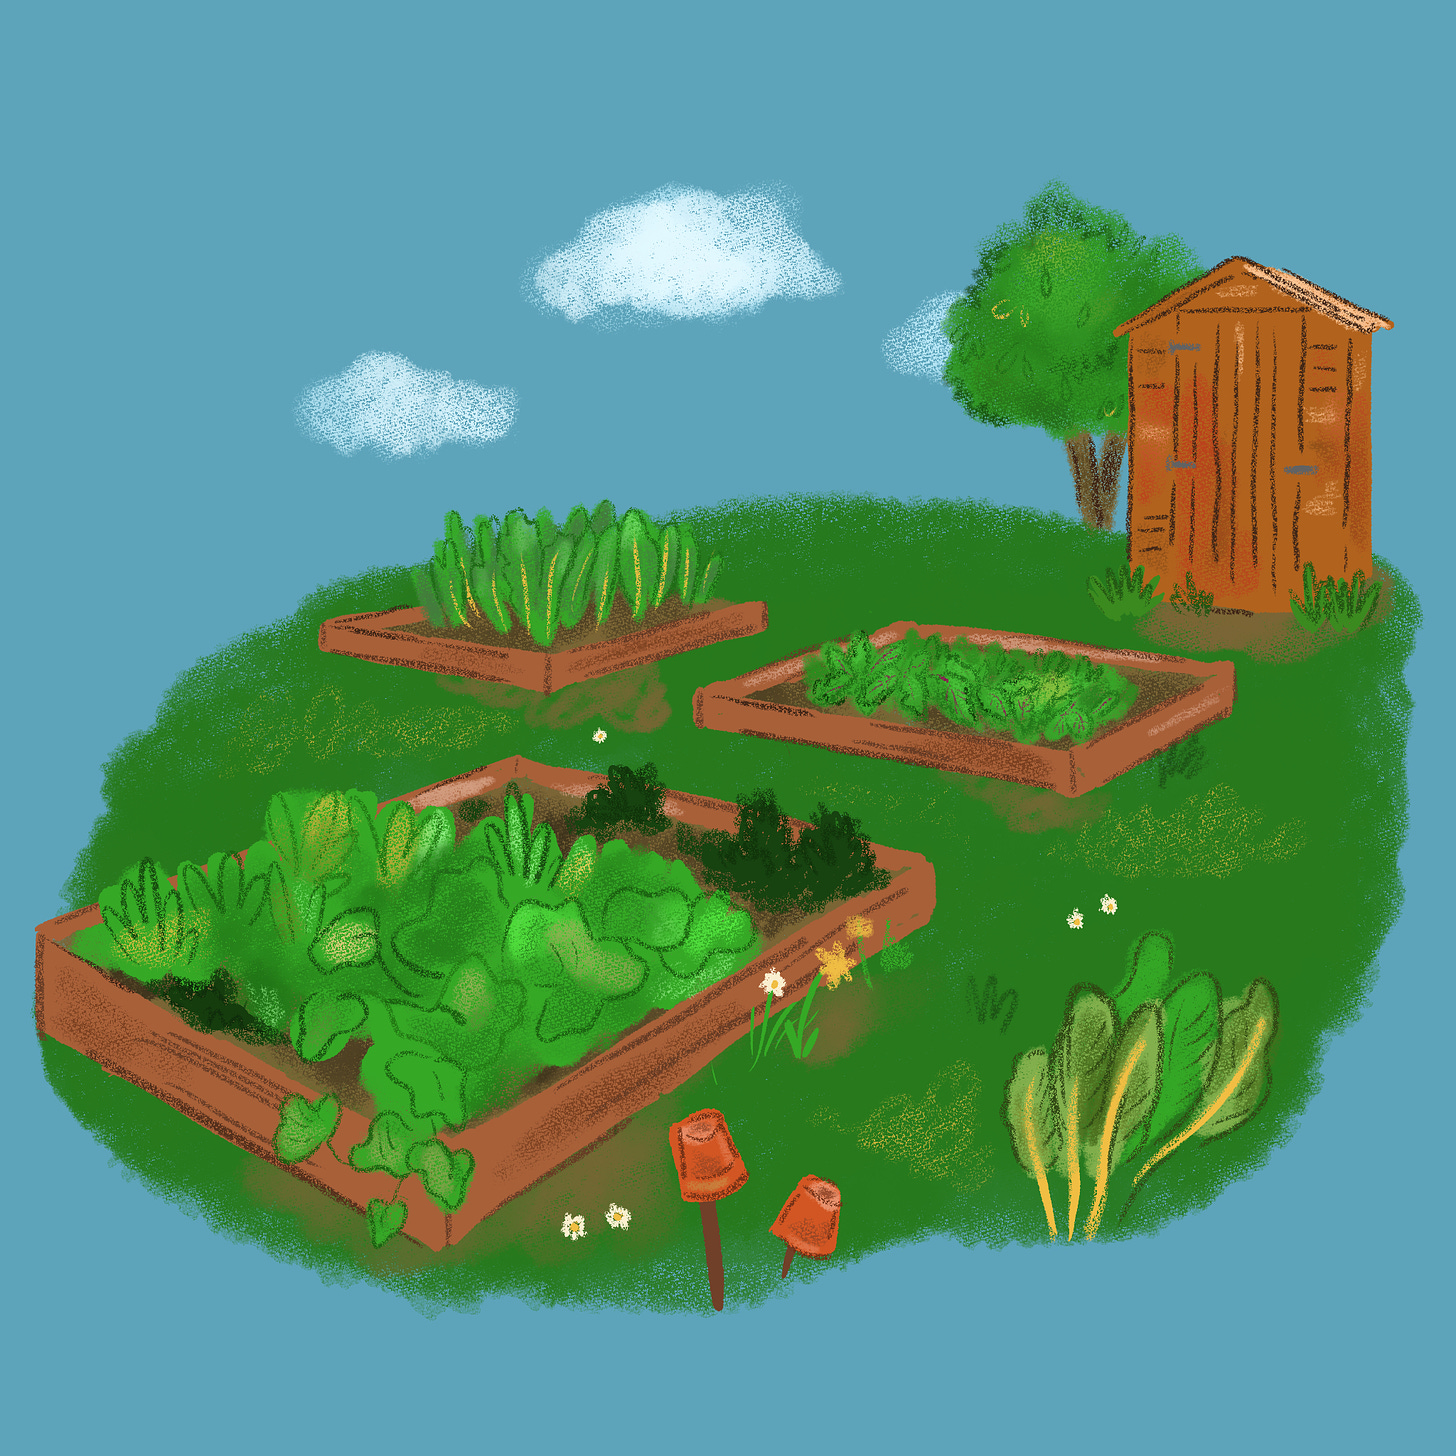 Three raised beds filled with green lush vegetables in a garden. A cute little shed is at the back of the garden next to a happy tree.